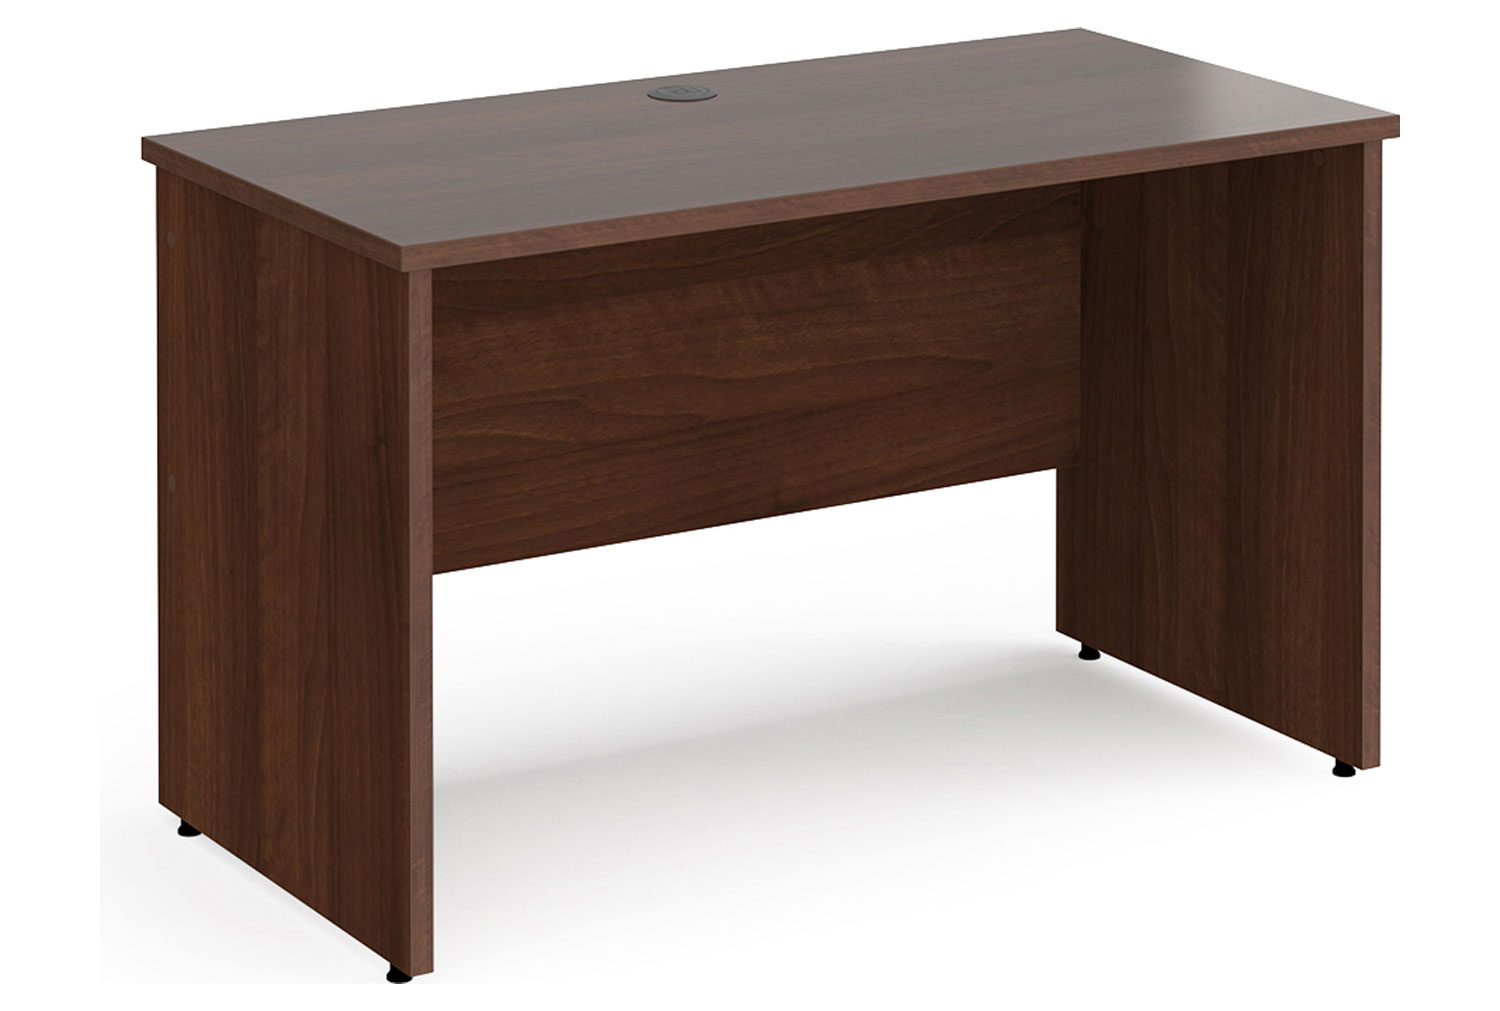 Tully Panel End Narrow Rectangular Office Desk, 120w60dx73h (cm), Walnut, Express Delivery